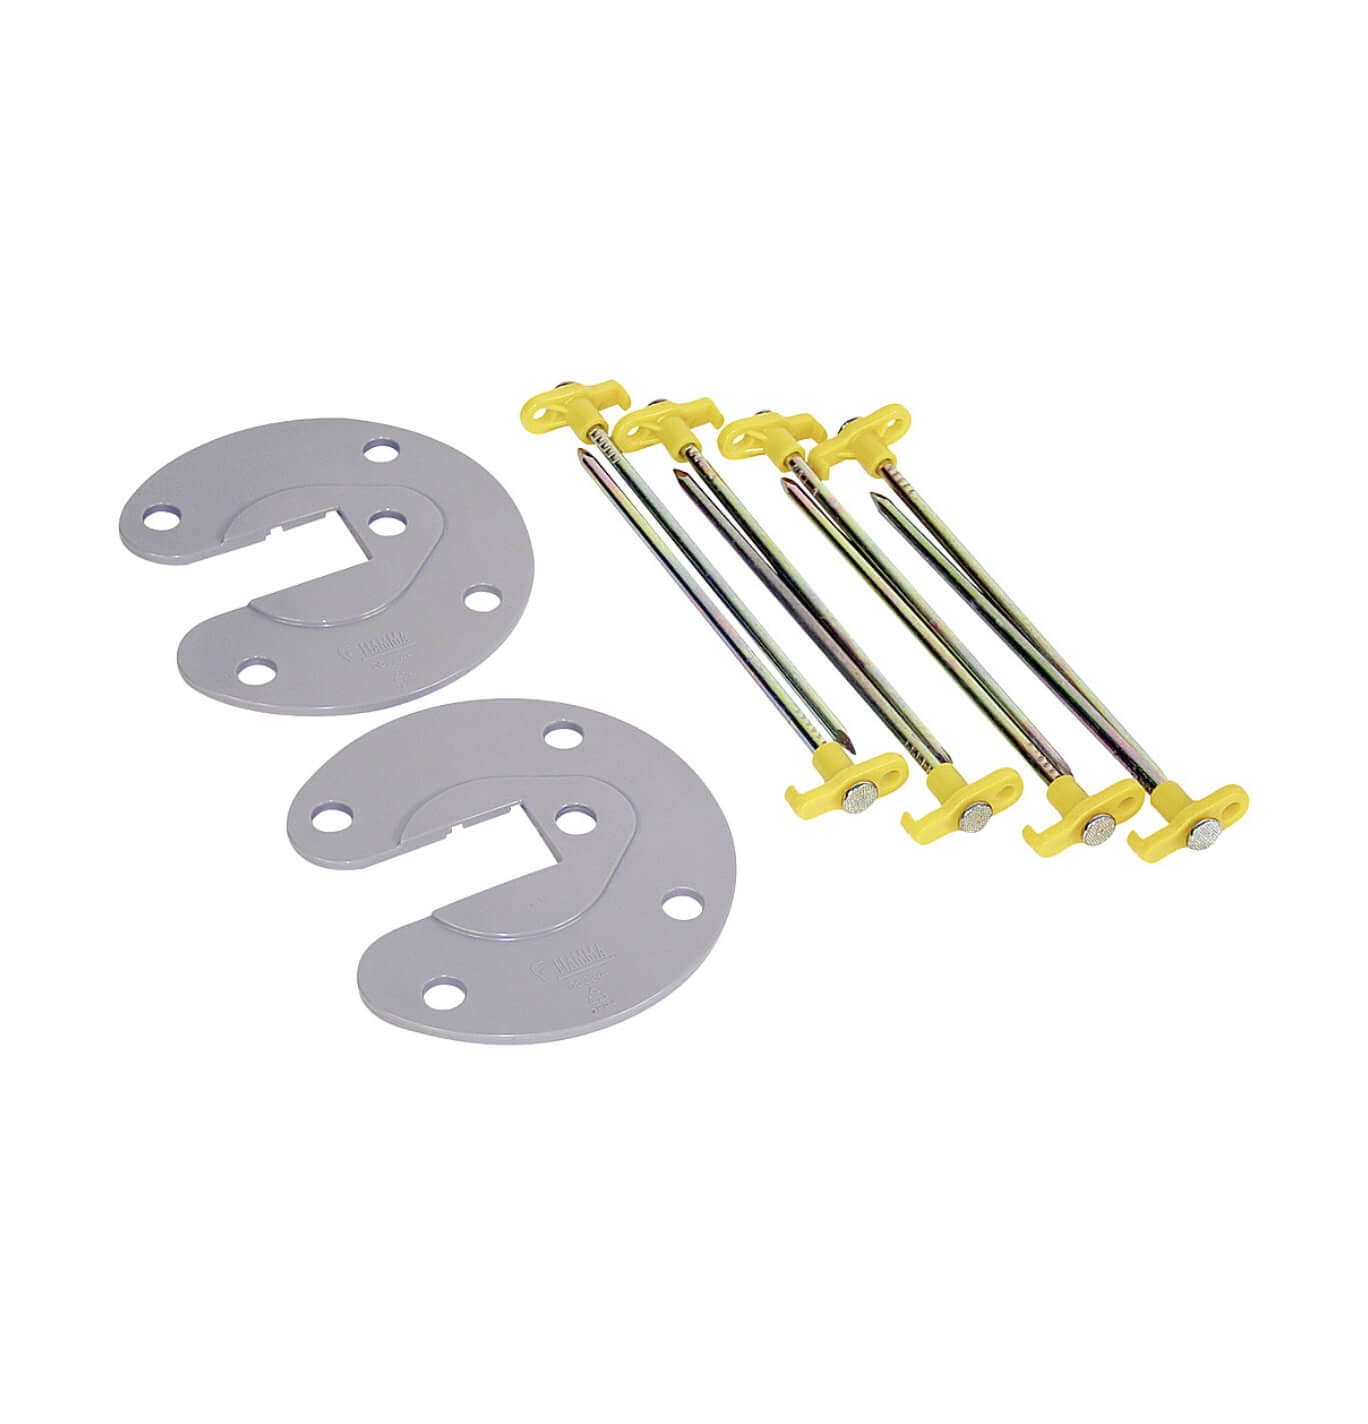 Fiamma Awning Ground Fixing Support Plates Kit | 98655-724 Image